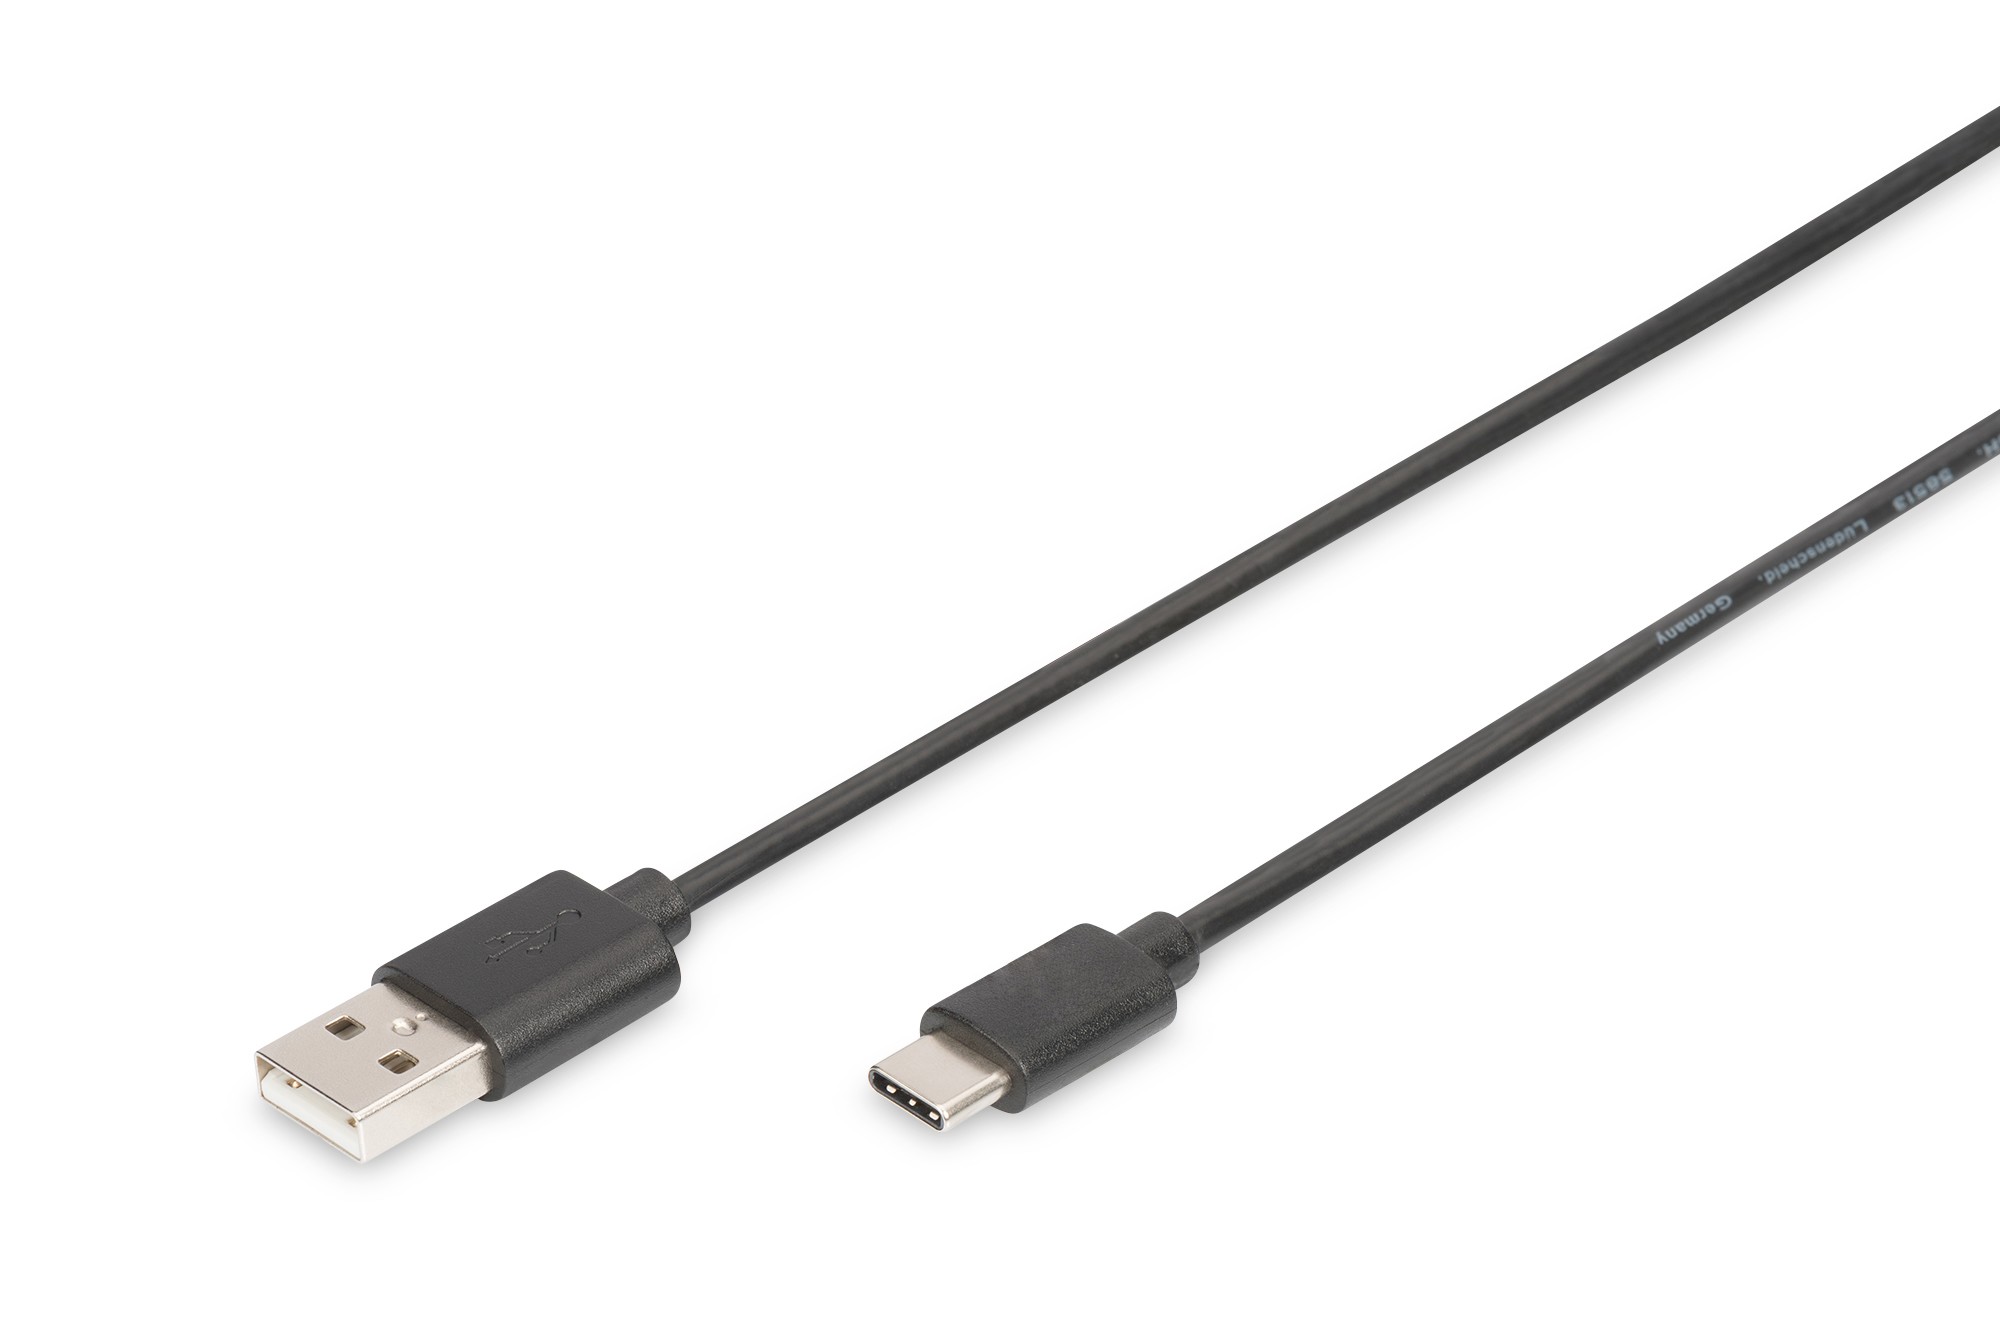 AK-300154-010-S  USB Type-C connection cable, type C to A M/M, 1.0m, 3A, 480MB, 2.0 Version, bl